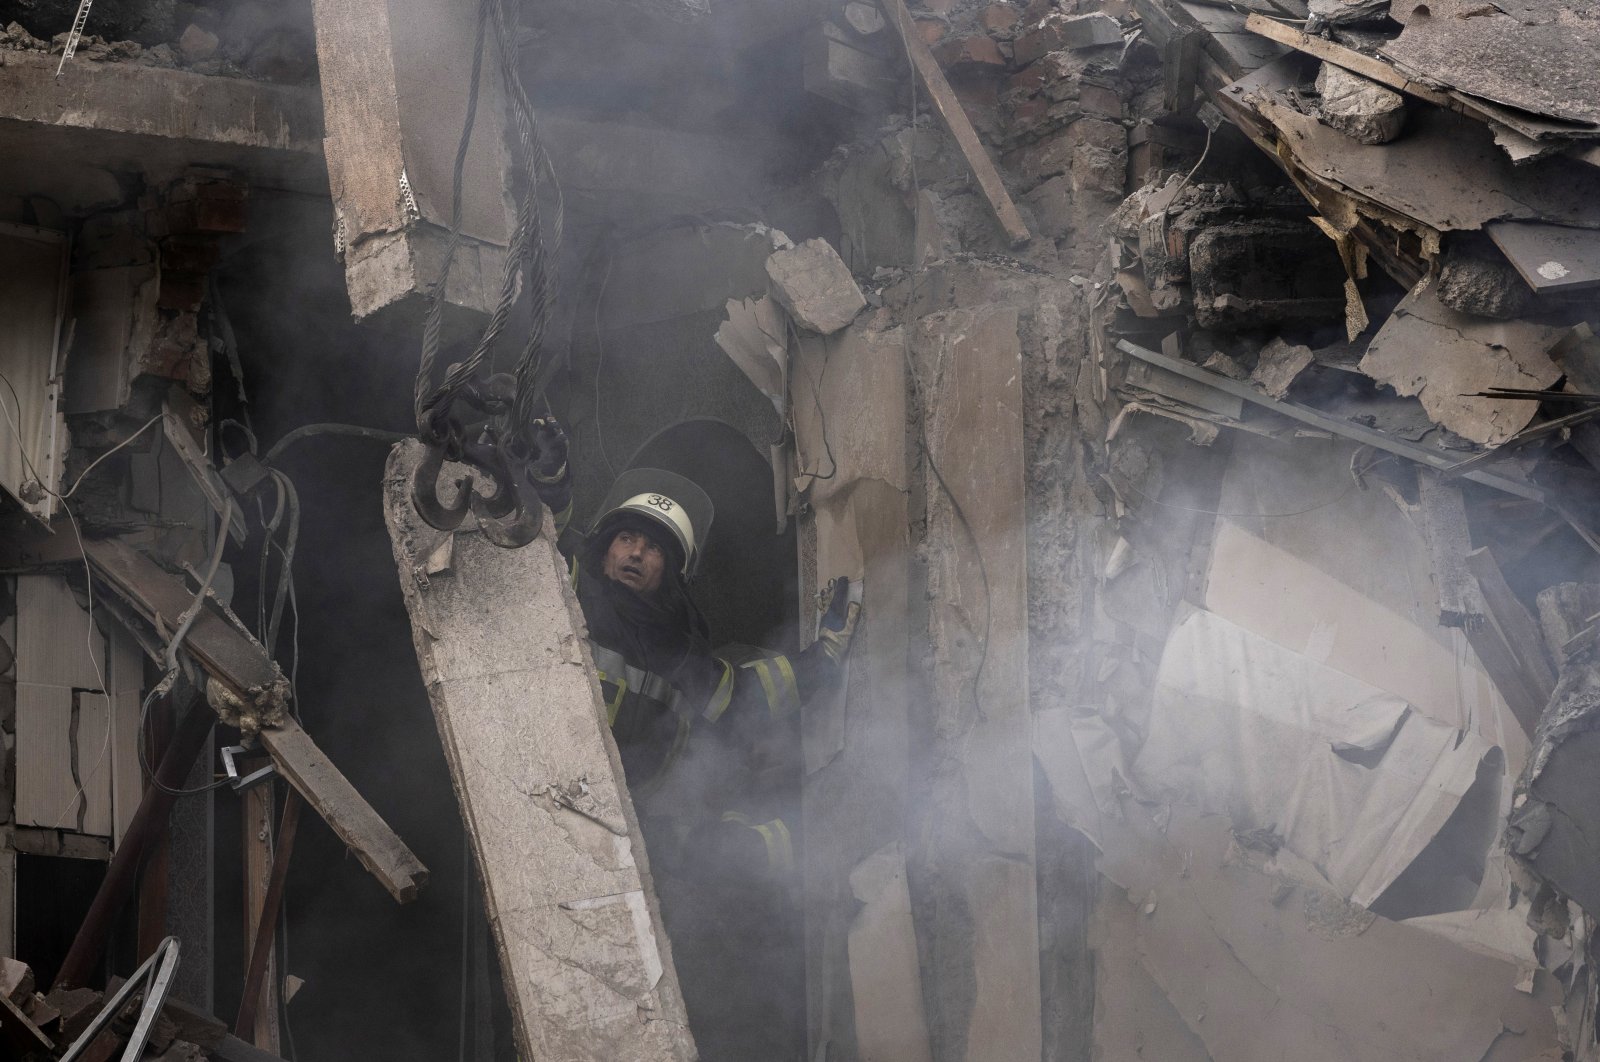 A firefighter works to extinguish a fire as he looks for potential victims after a Russian attack which heavily damaged a residential building in Sloviansk, Ukraine, Sept. 7, 2022. (AP Photo)